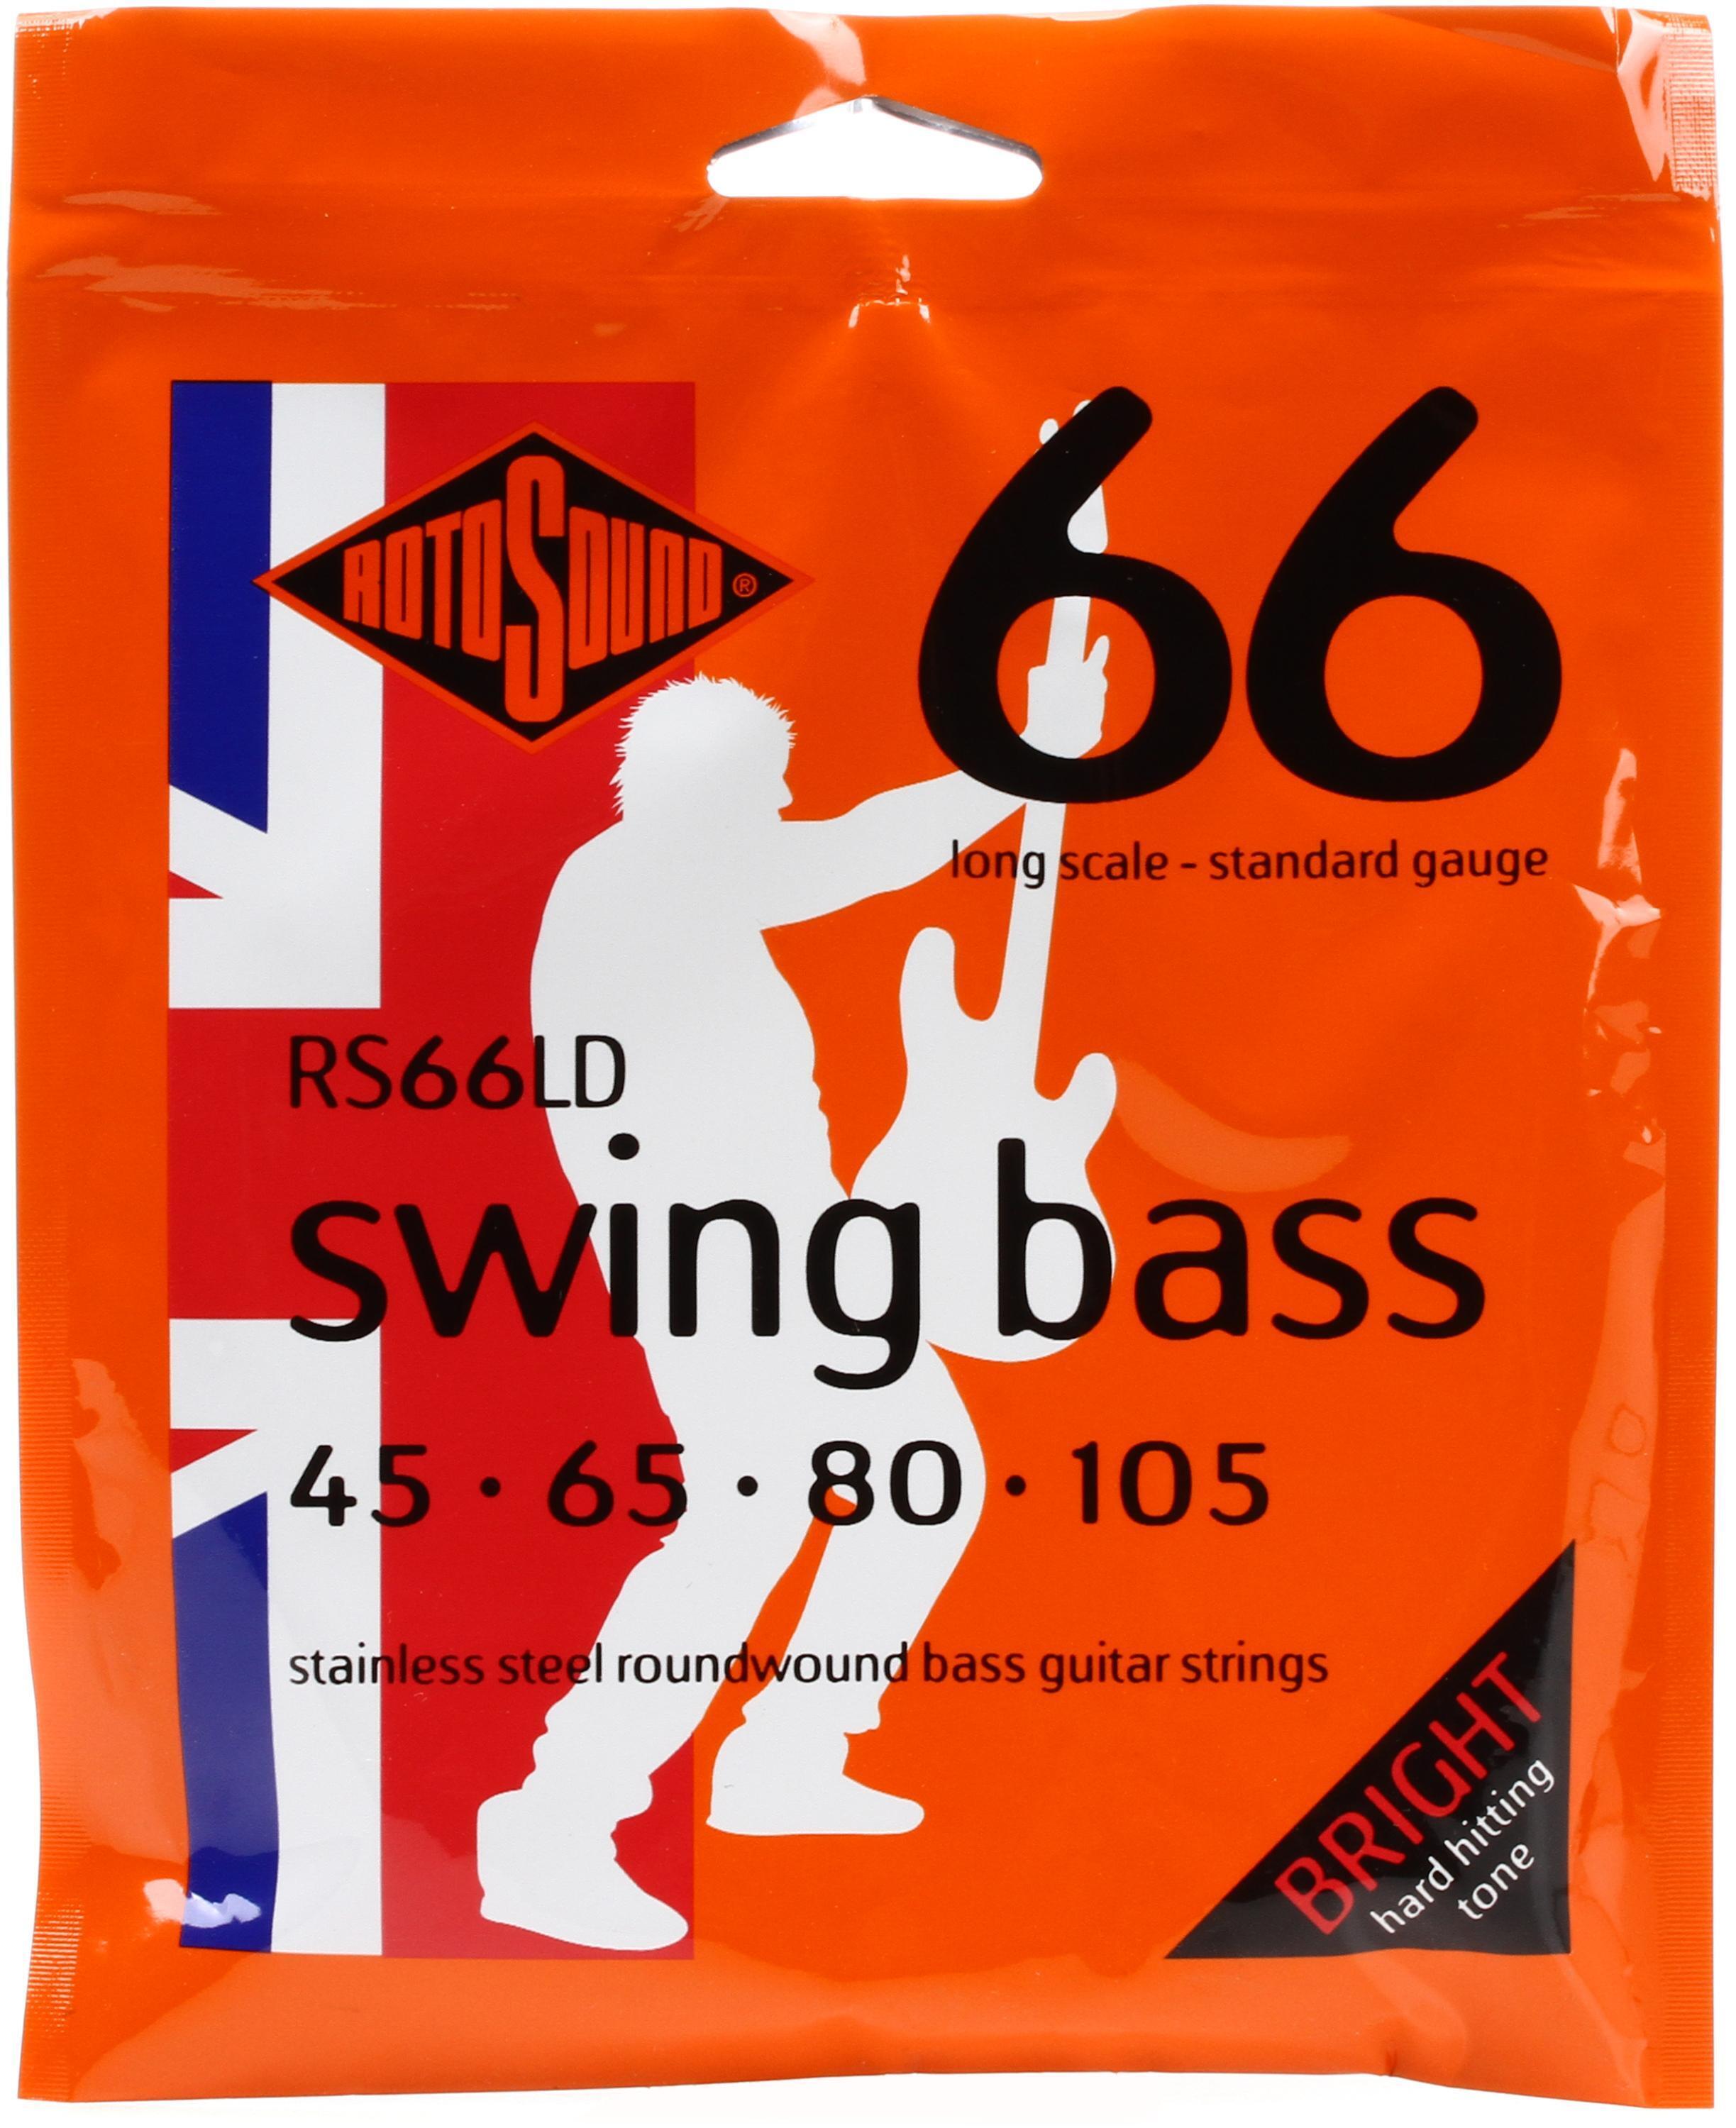 Rotosound RS66LD Swing Bass 66 Stainless Steel Roundwound Bass Guitar  Strings - .045-.105 Standard Long Scale | Sweetwater